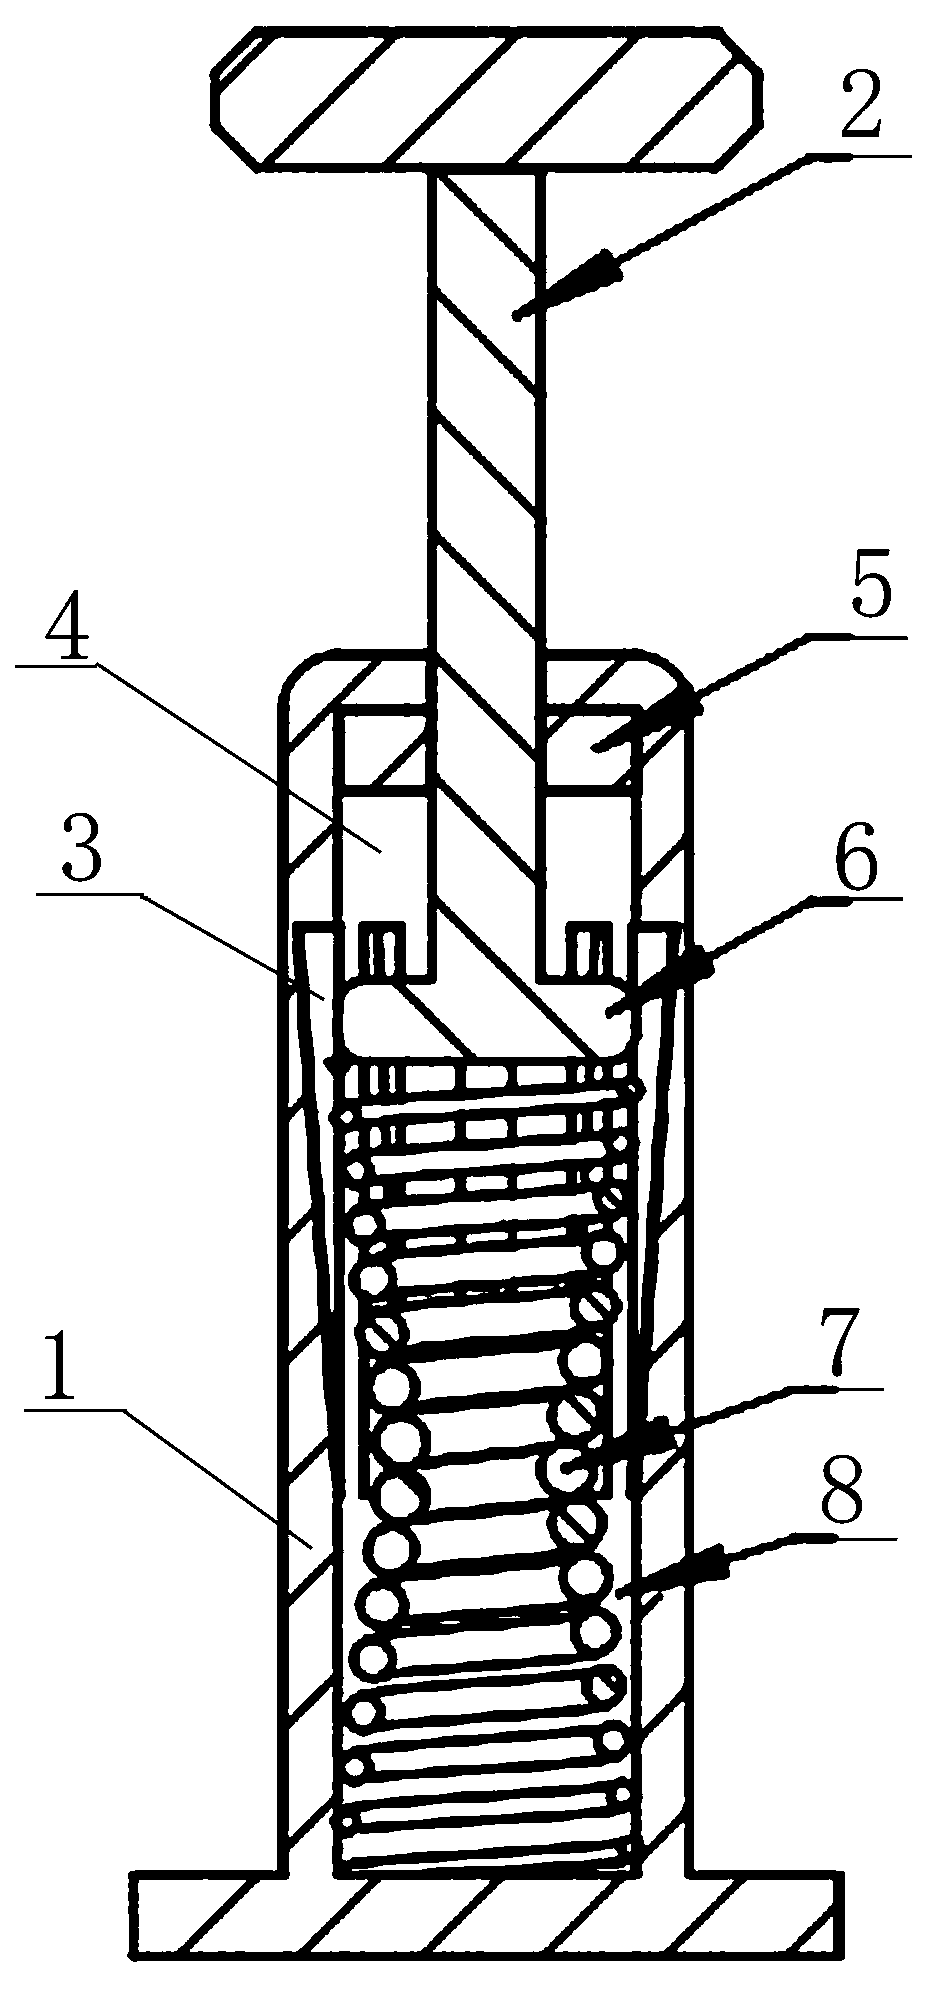 Variable rigidity hydraulic damping shock absorber with self-adaptive variable damping function